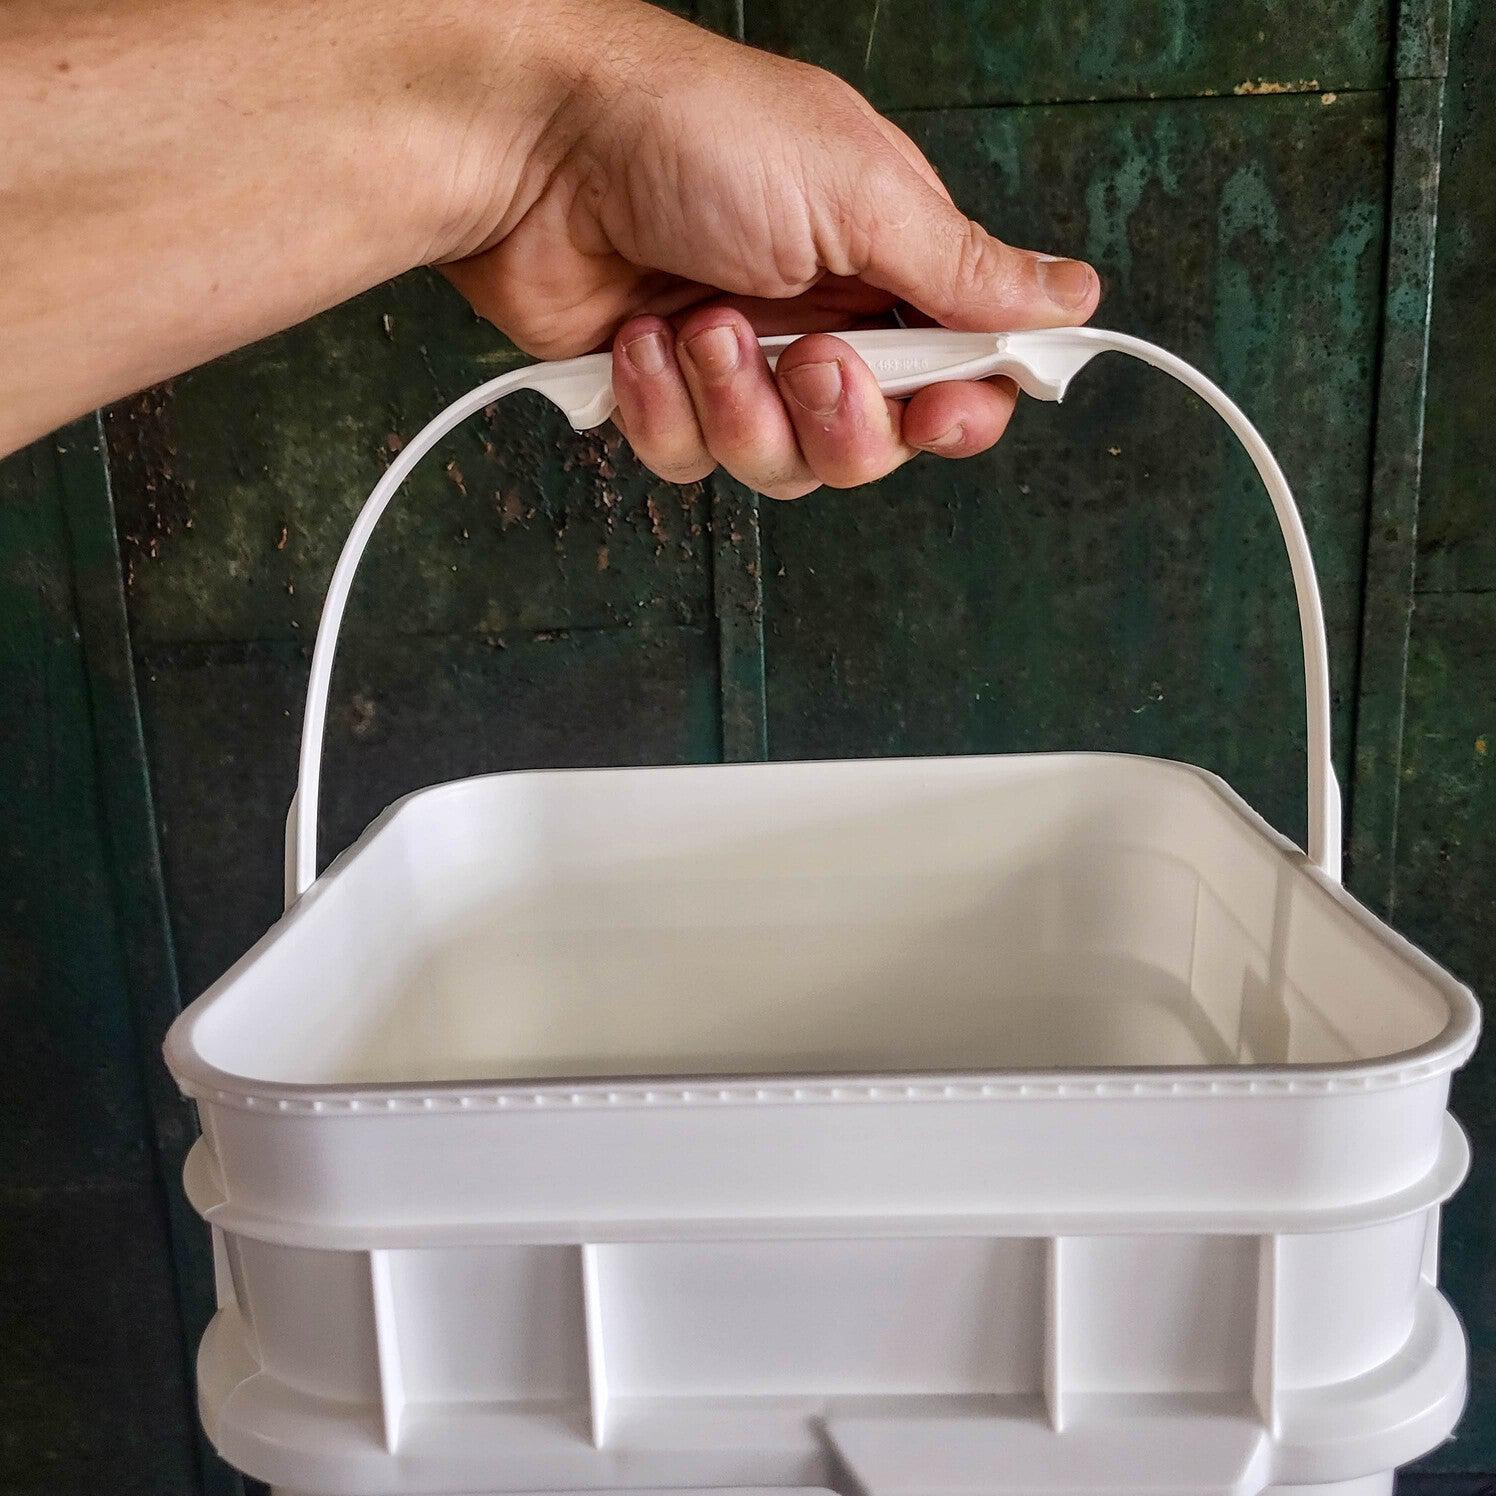 4 Gallon White HDPE Square Bucket (Lid Sold Separately)